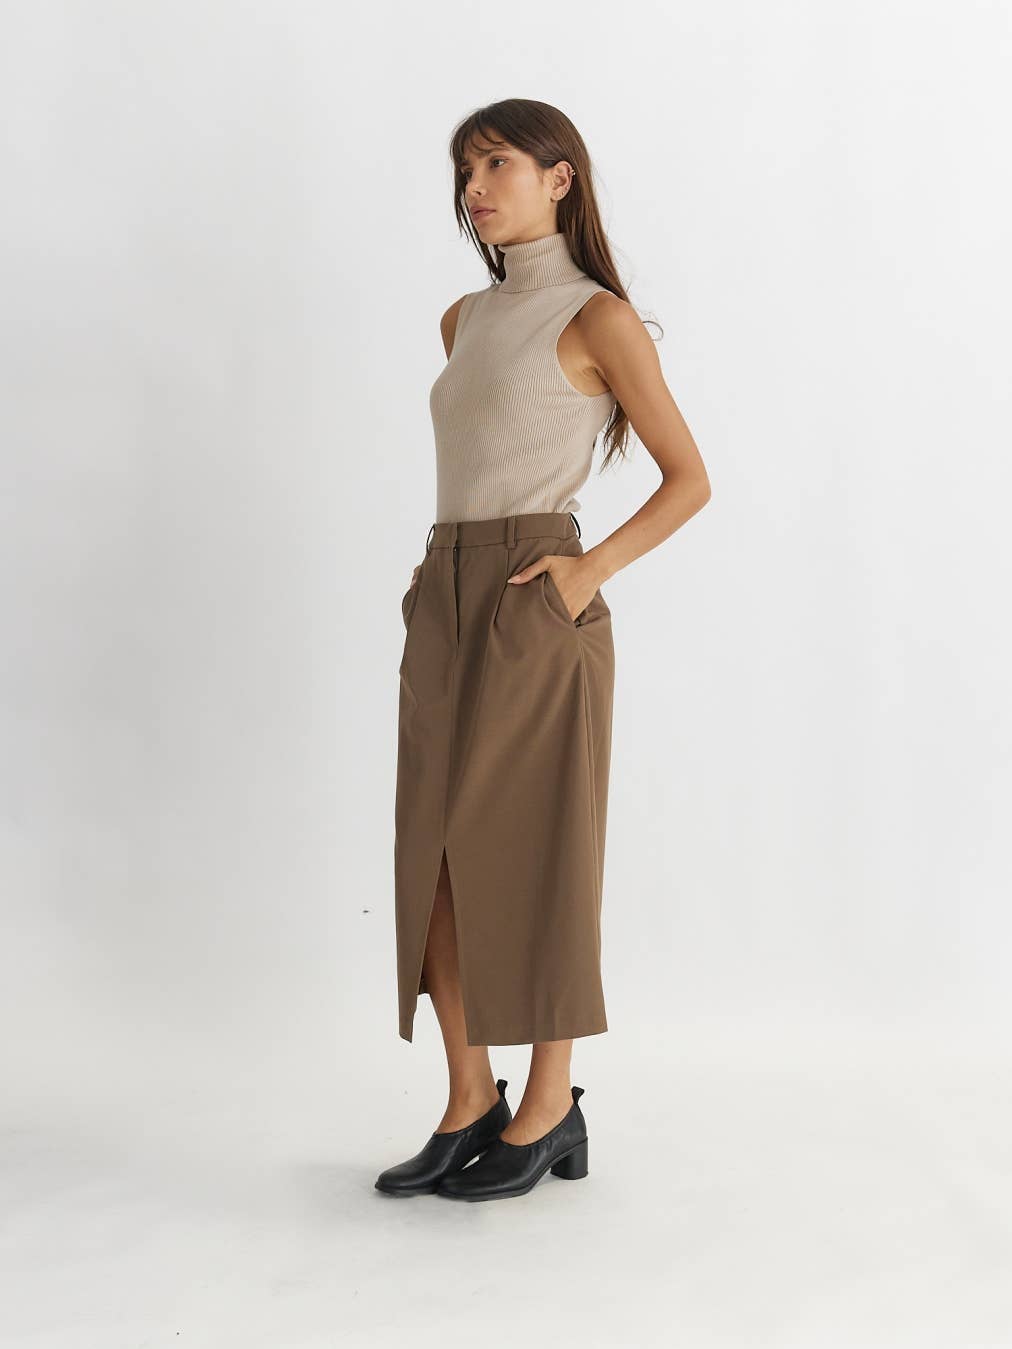 The Penny Skirt